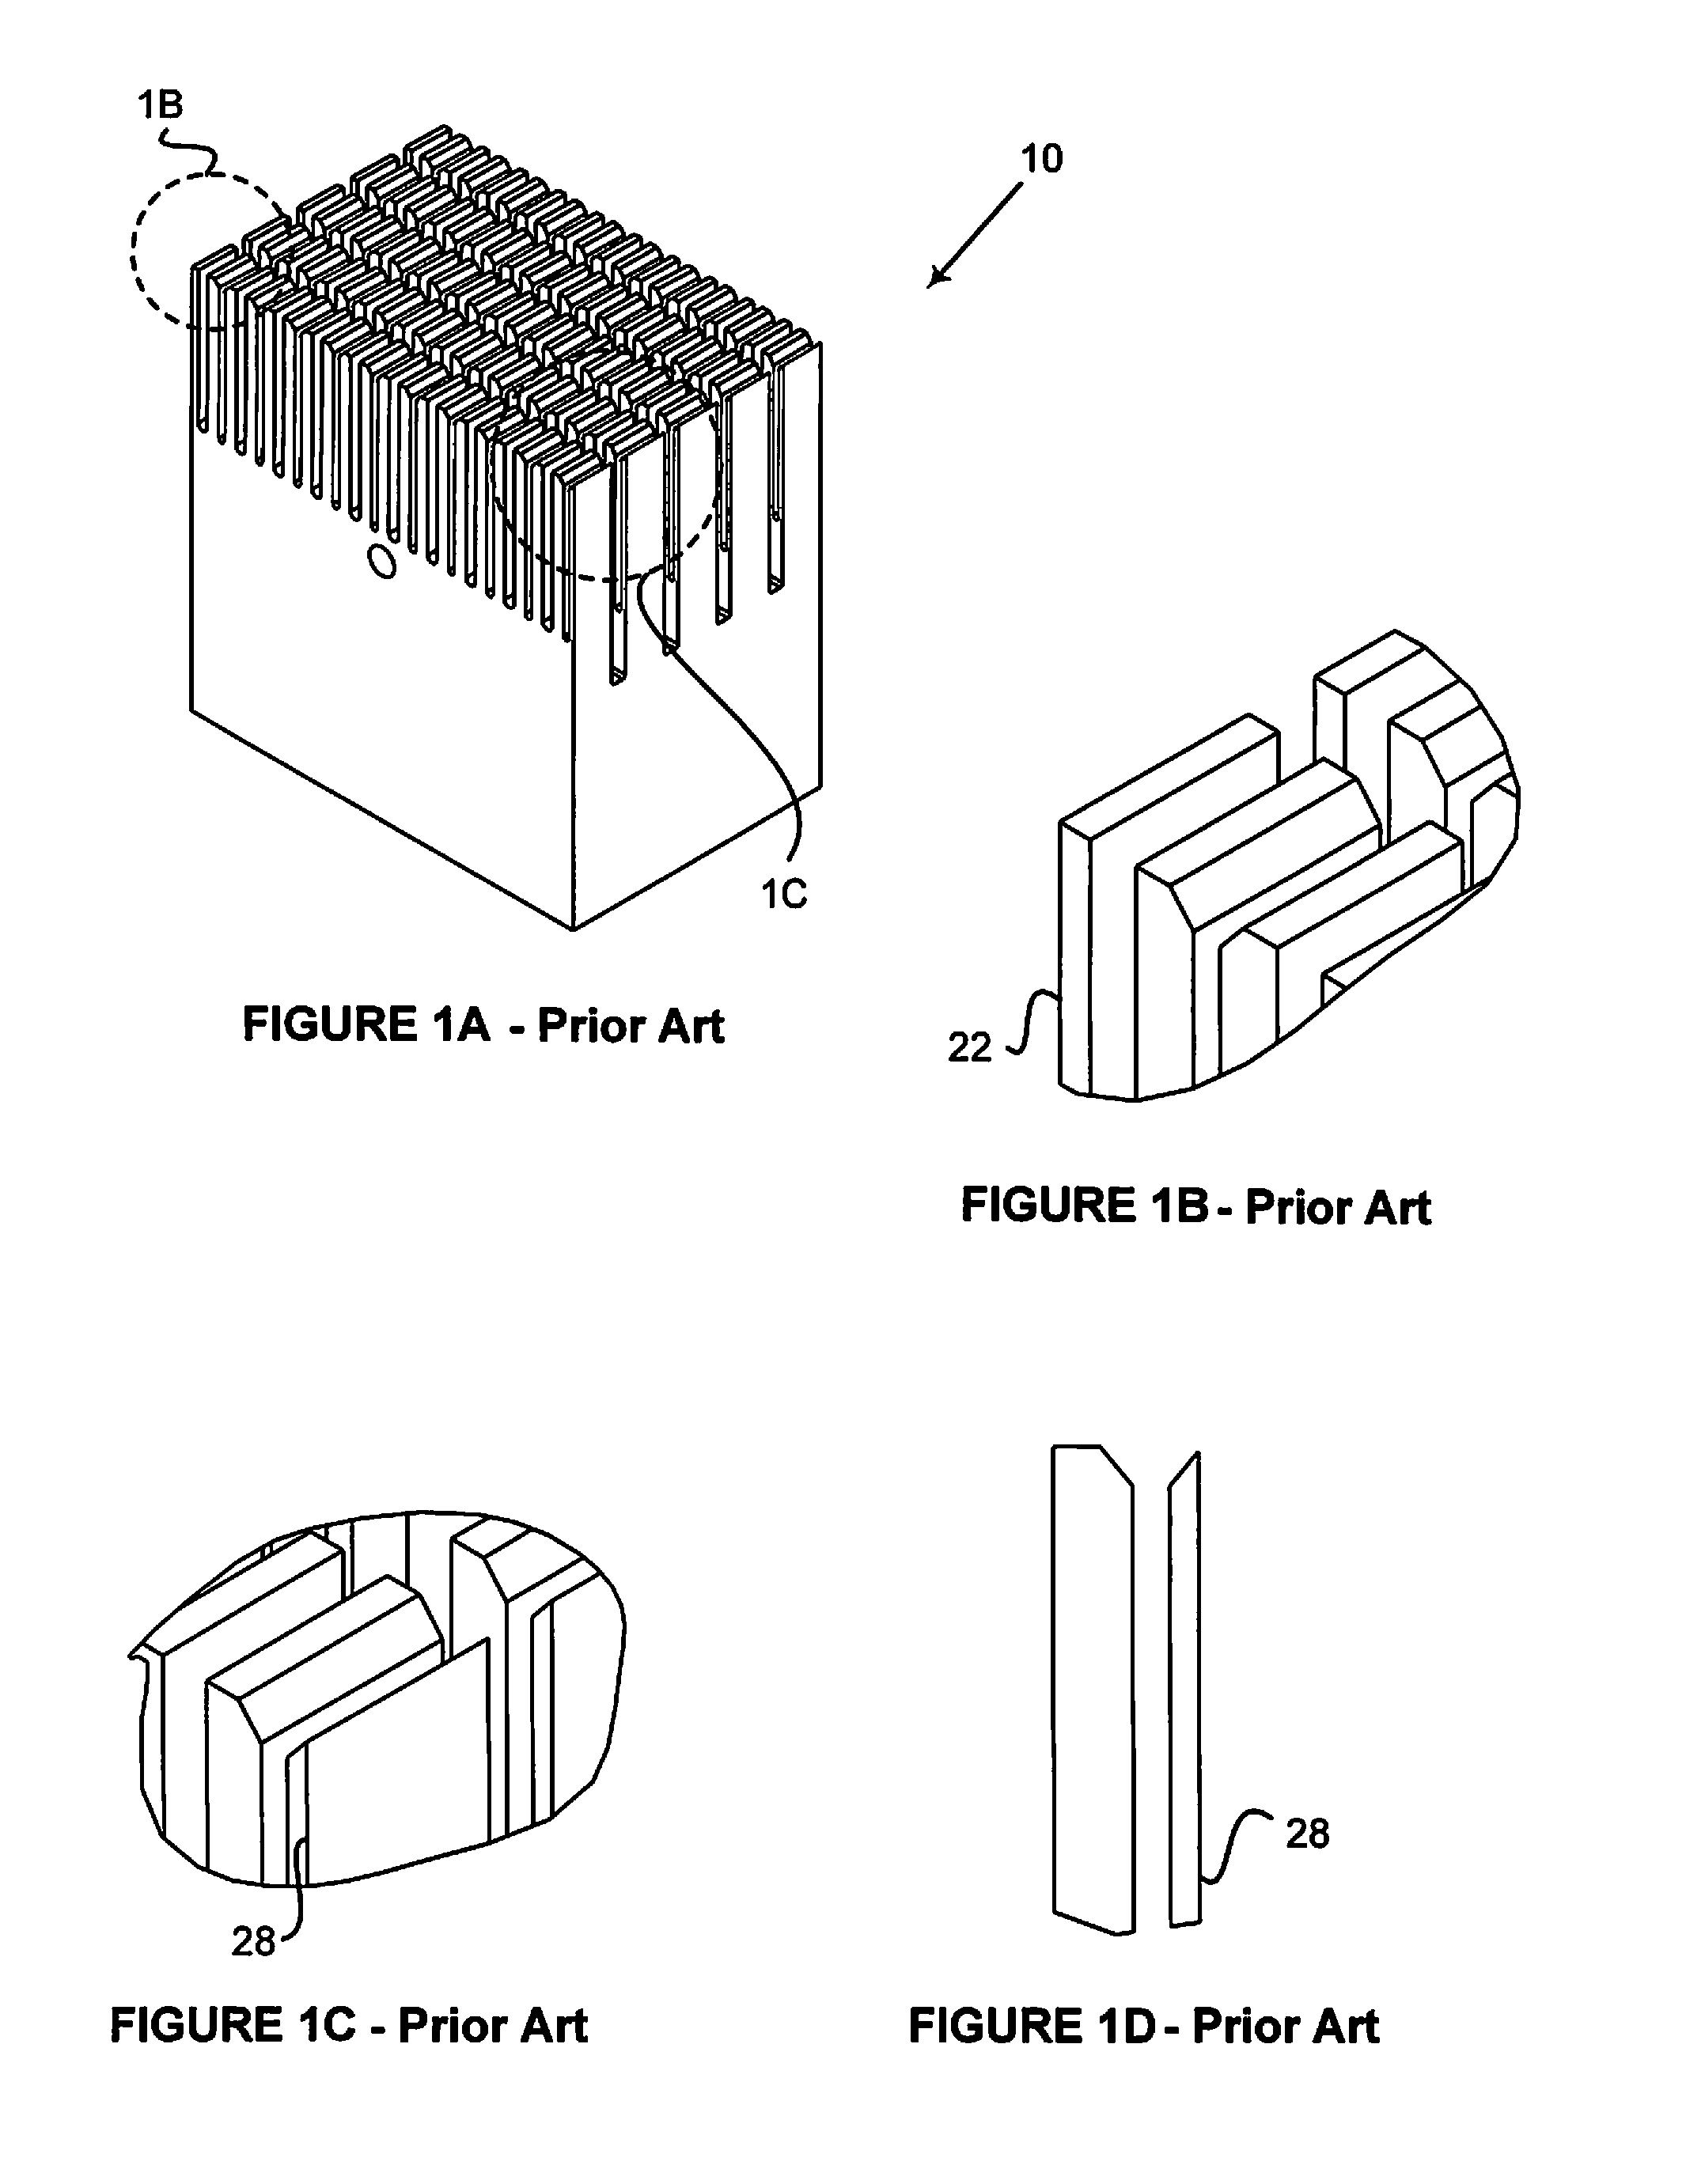 Tools for Seating Connectors on Substrates